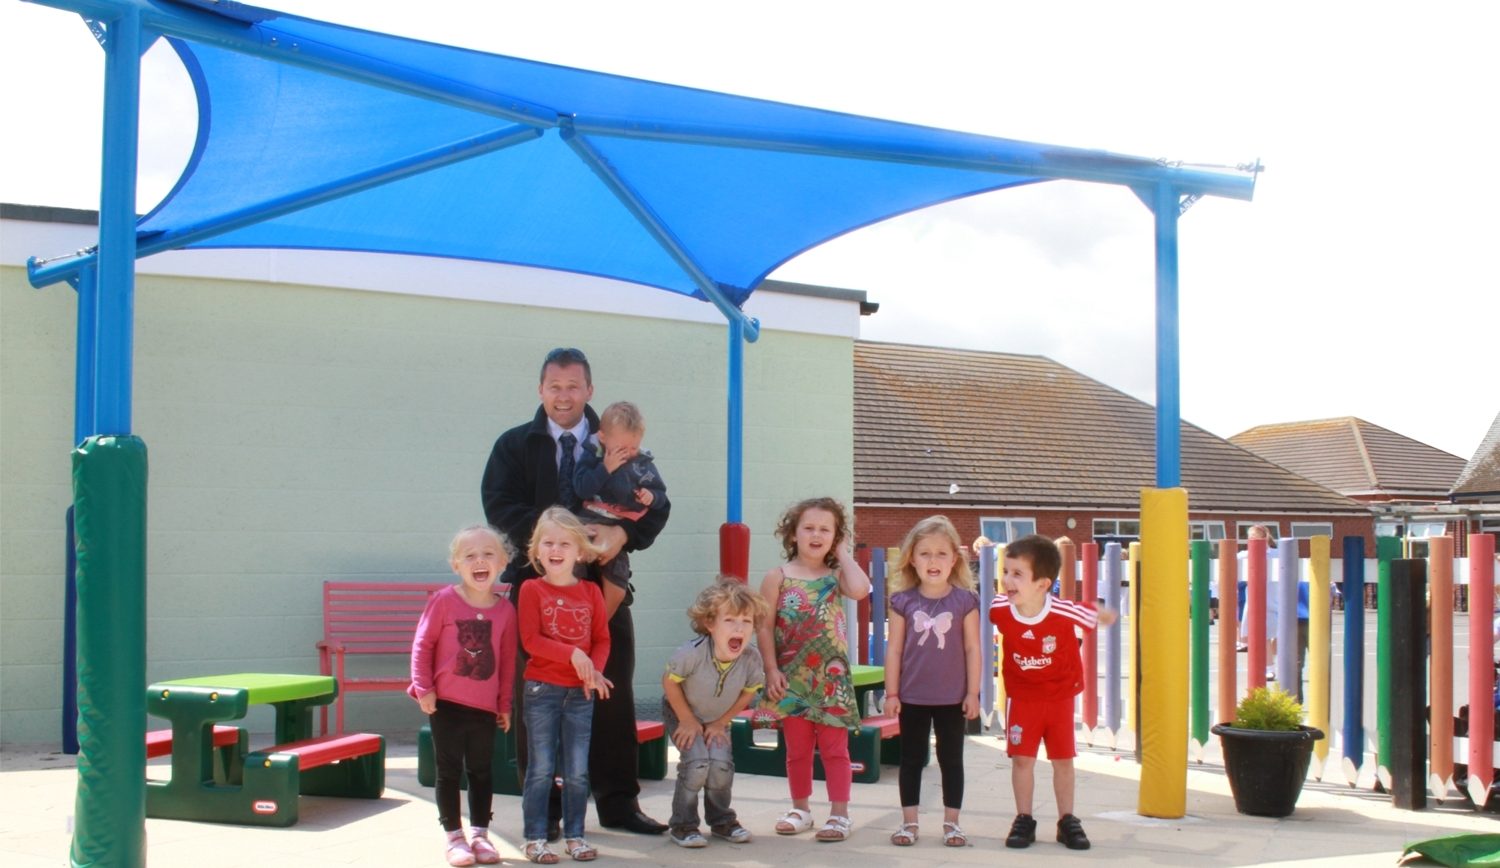 Little Clacton Pre-school enjoy story time in their new “home corner”